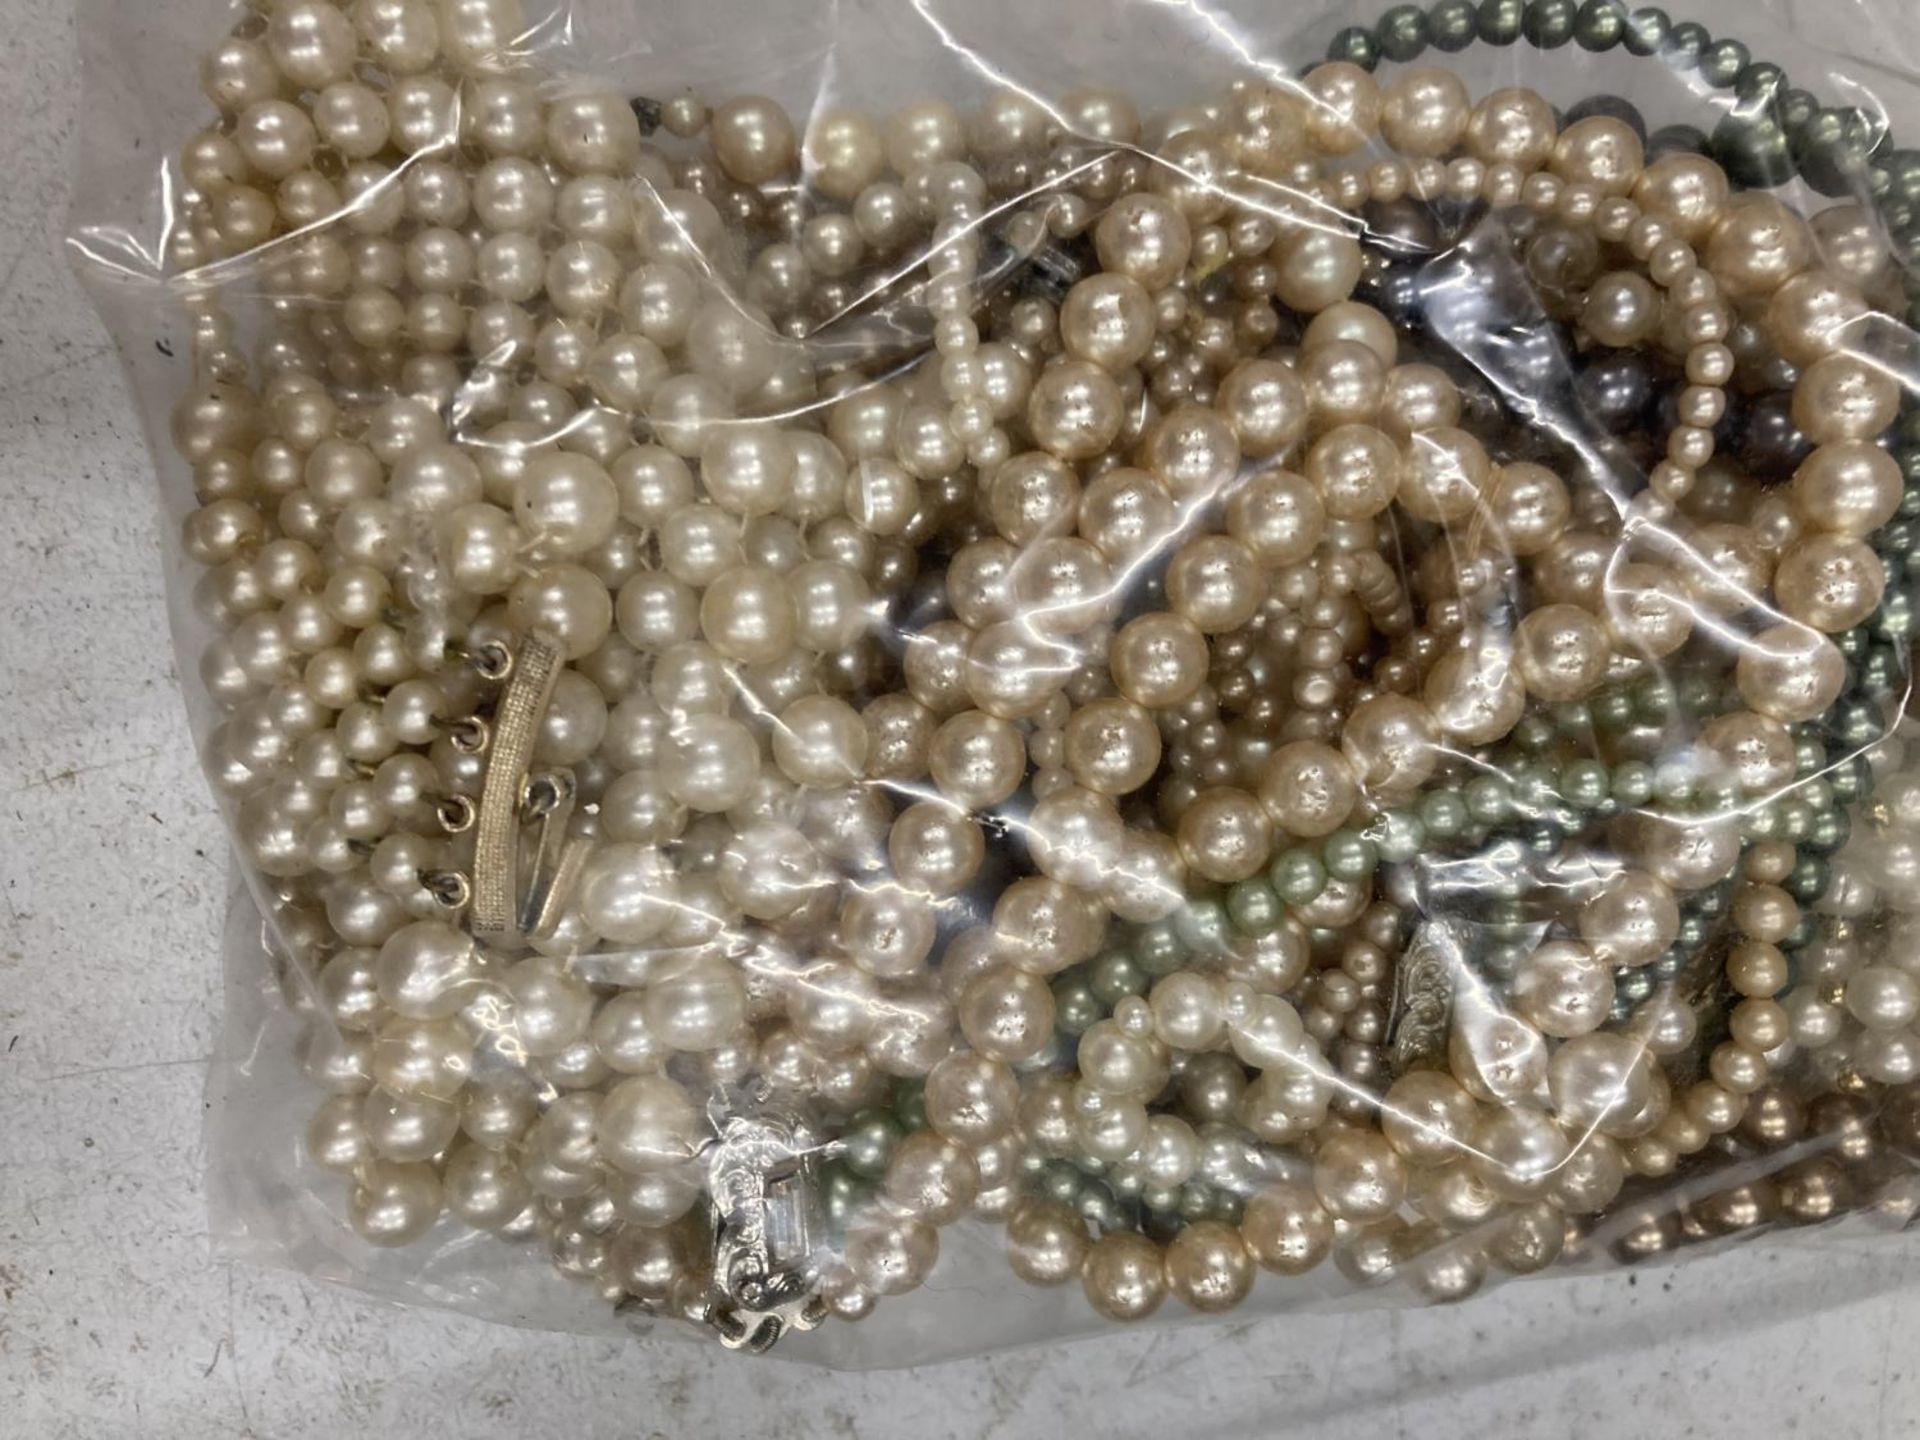 A LARGE QUANTITY OF PEARL NECKLACES - Image 3 of 3